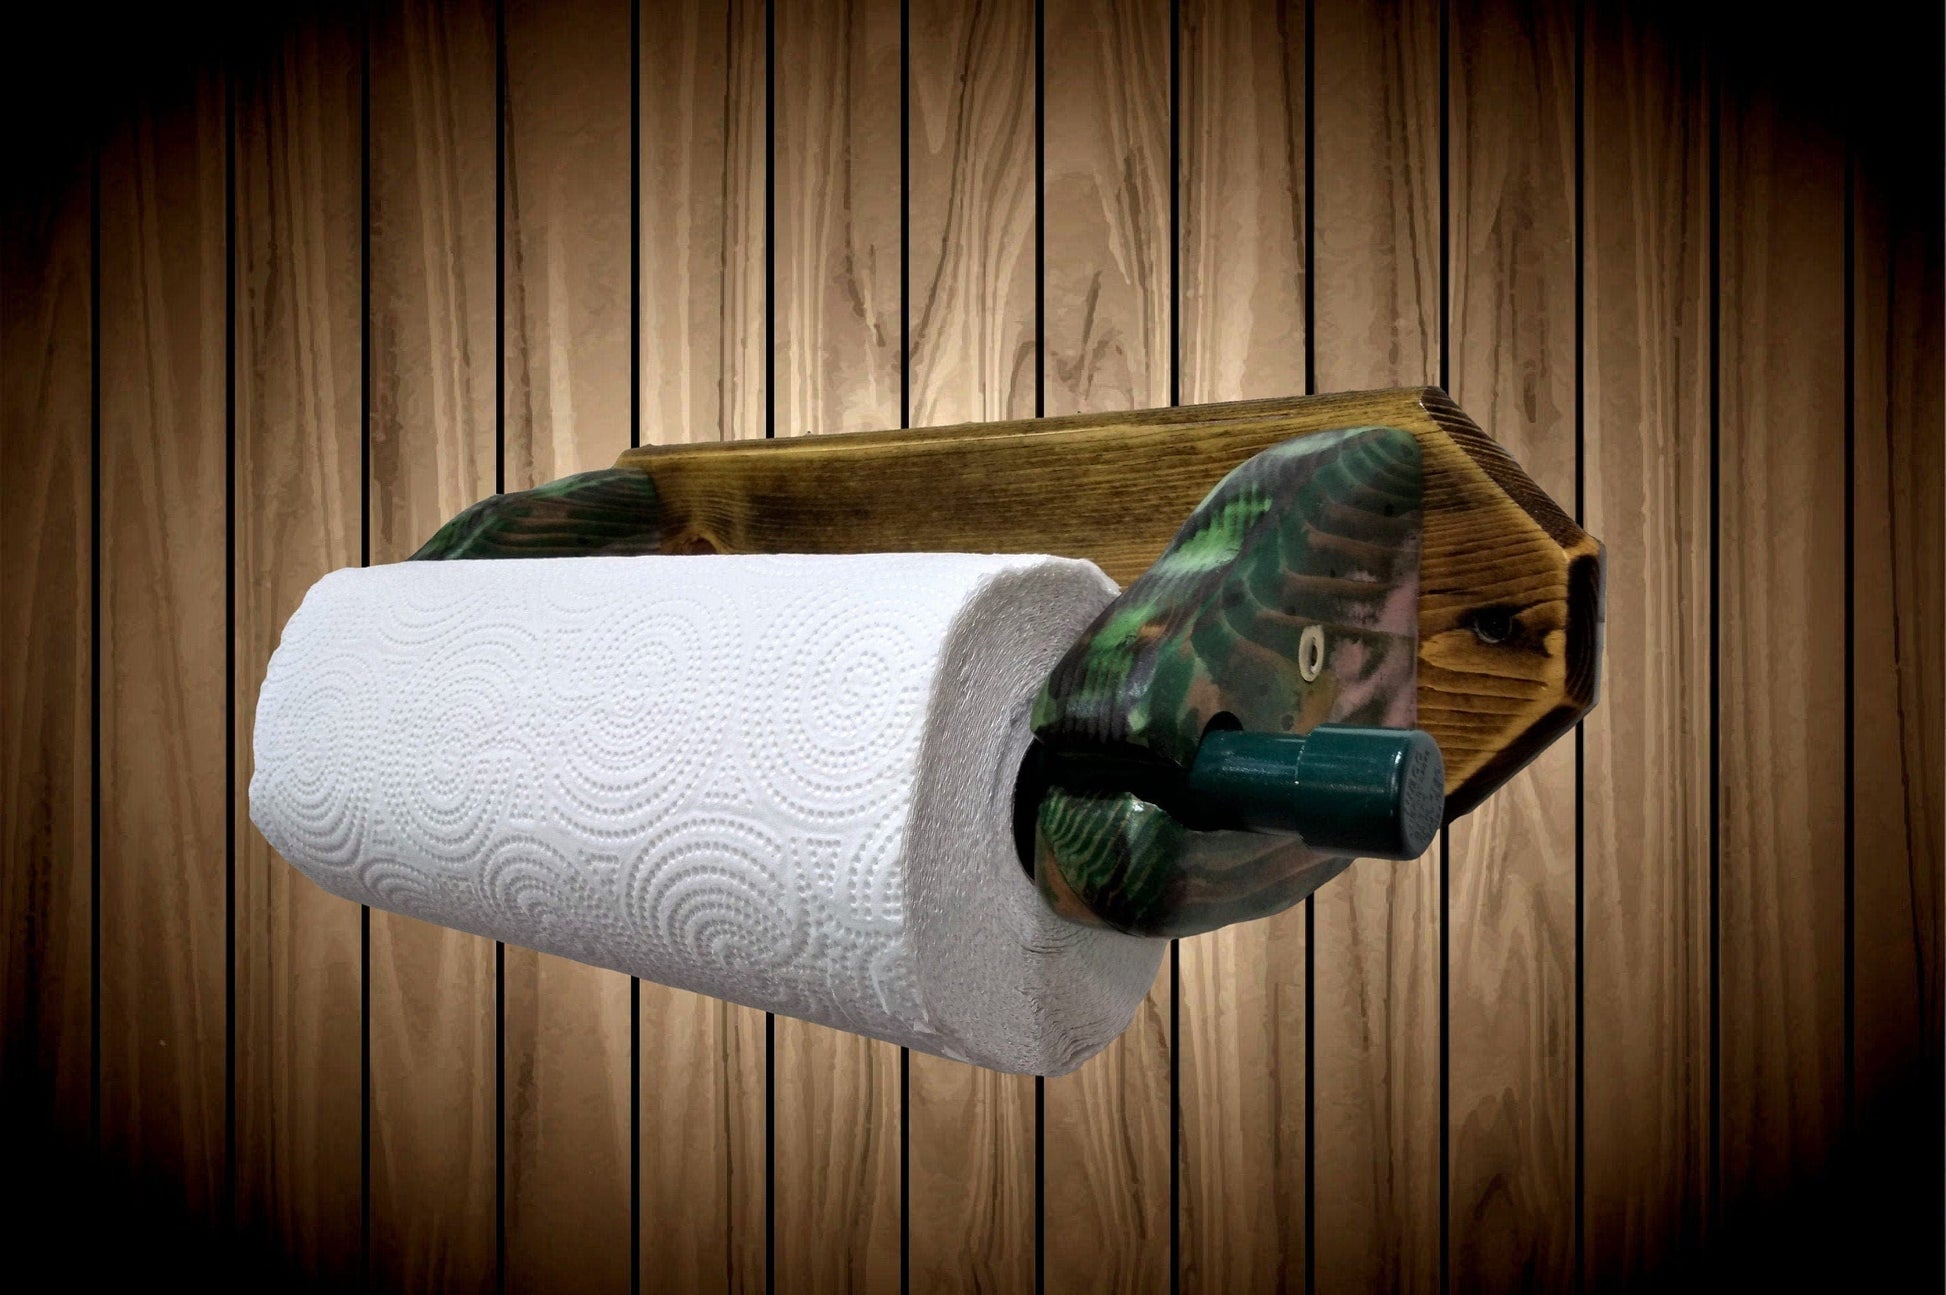 Wall Mounted Paper Hand Towel Holder. Rustic Industrial Paper